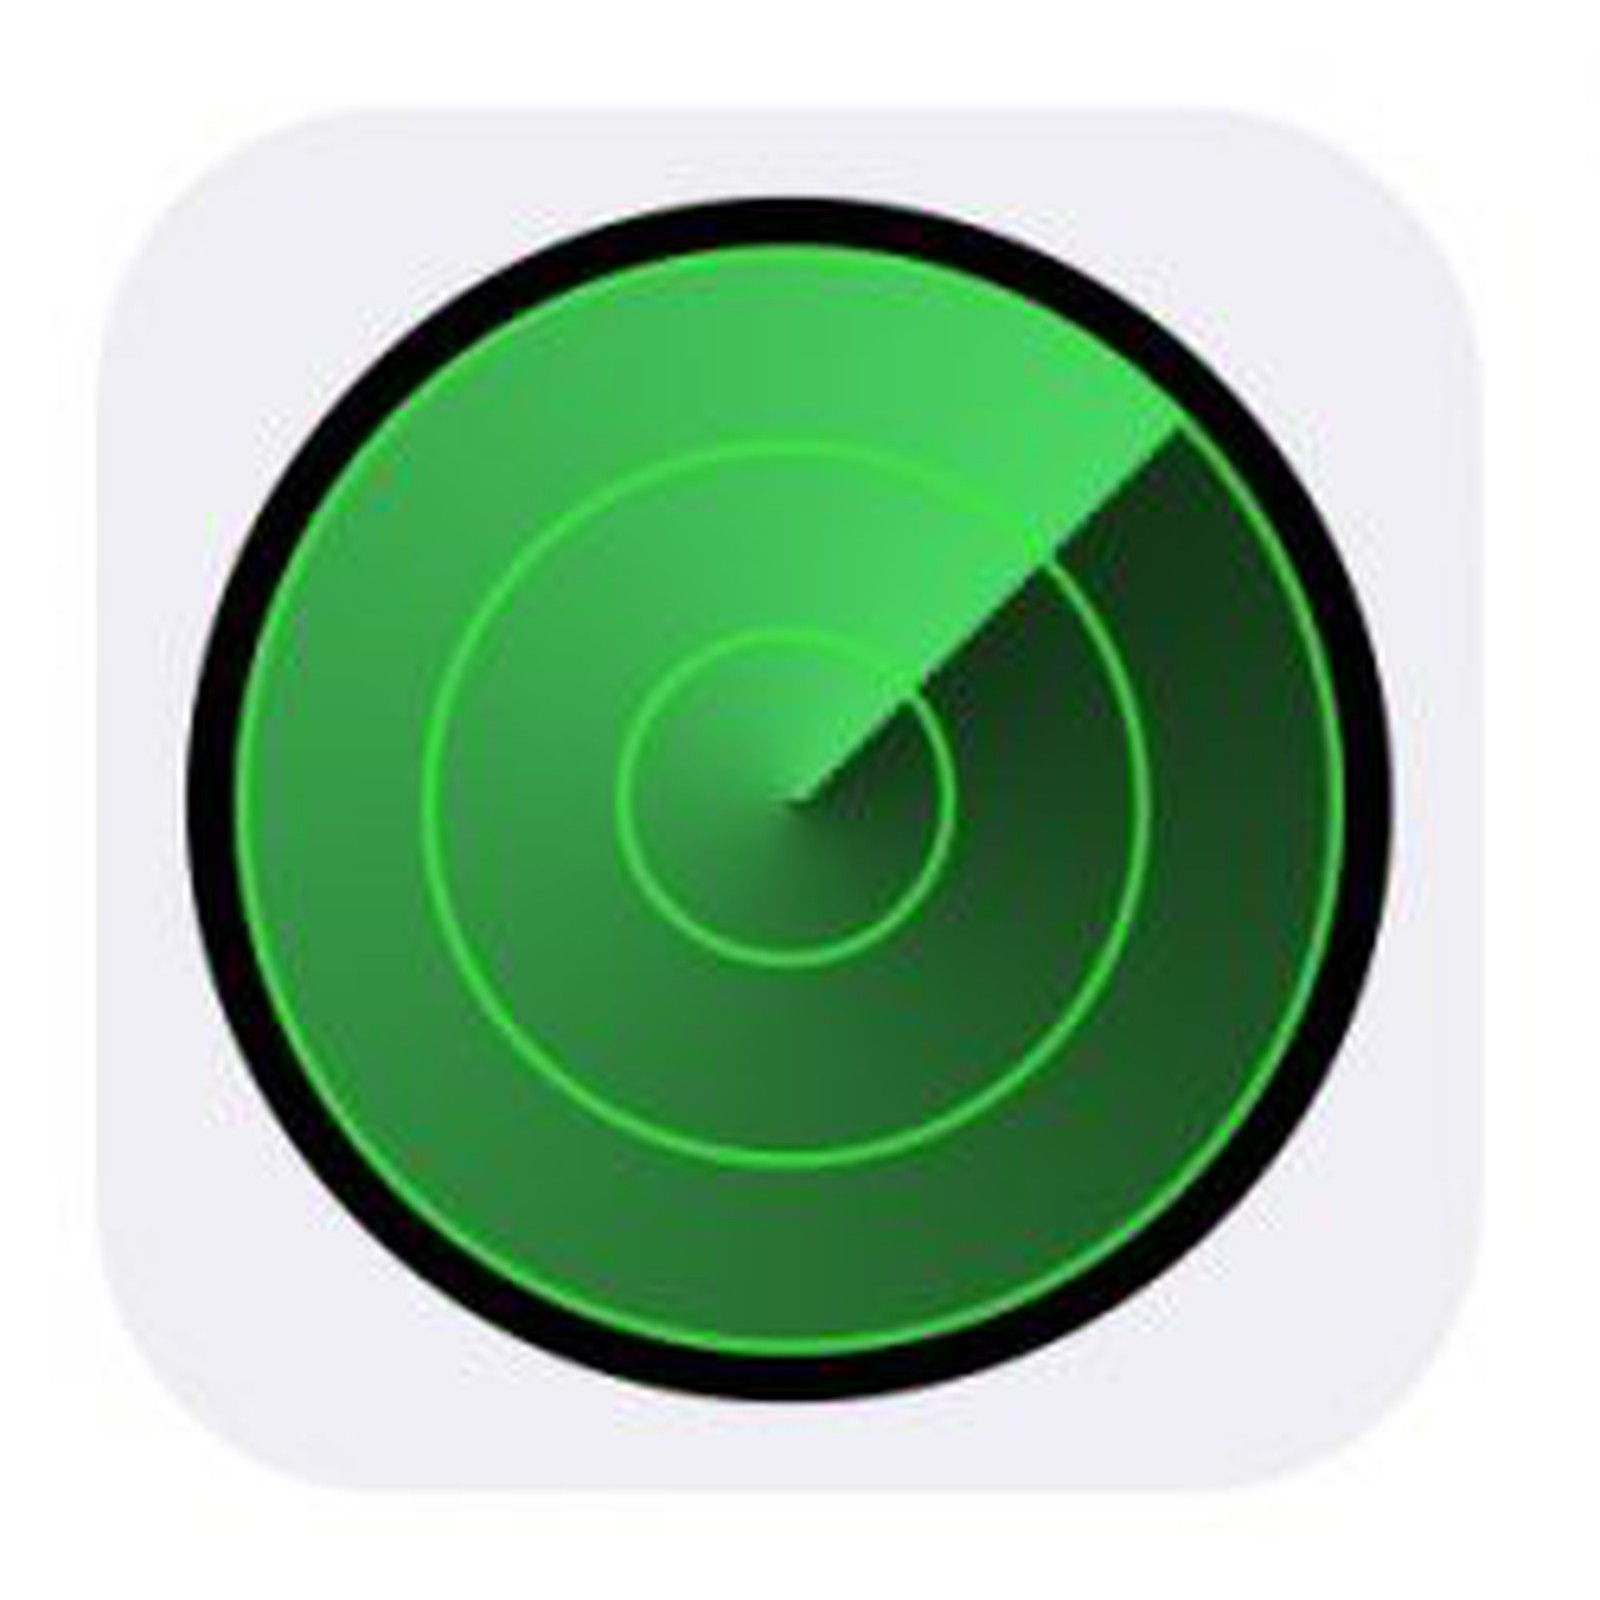 find my iphone app for pc